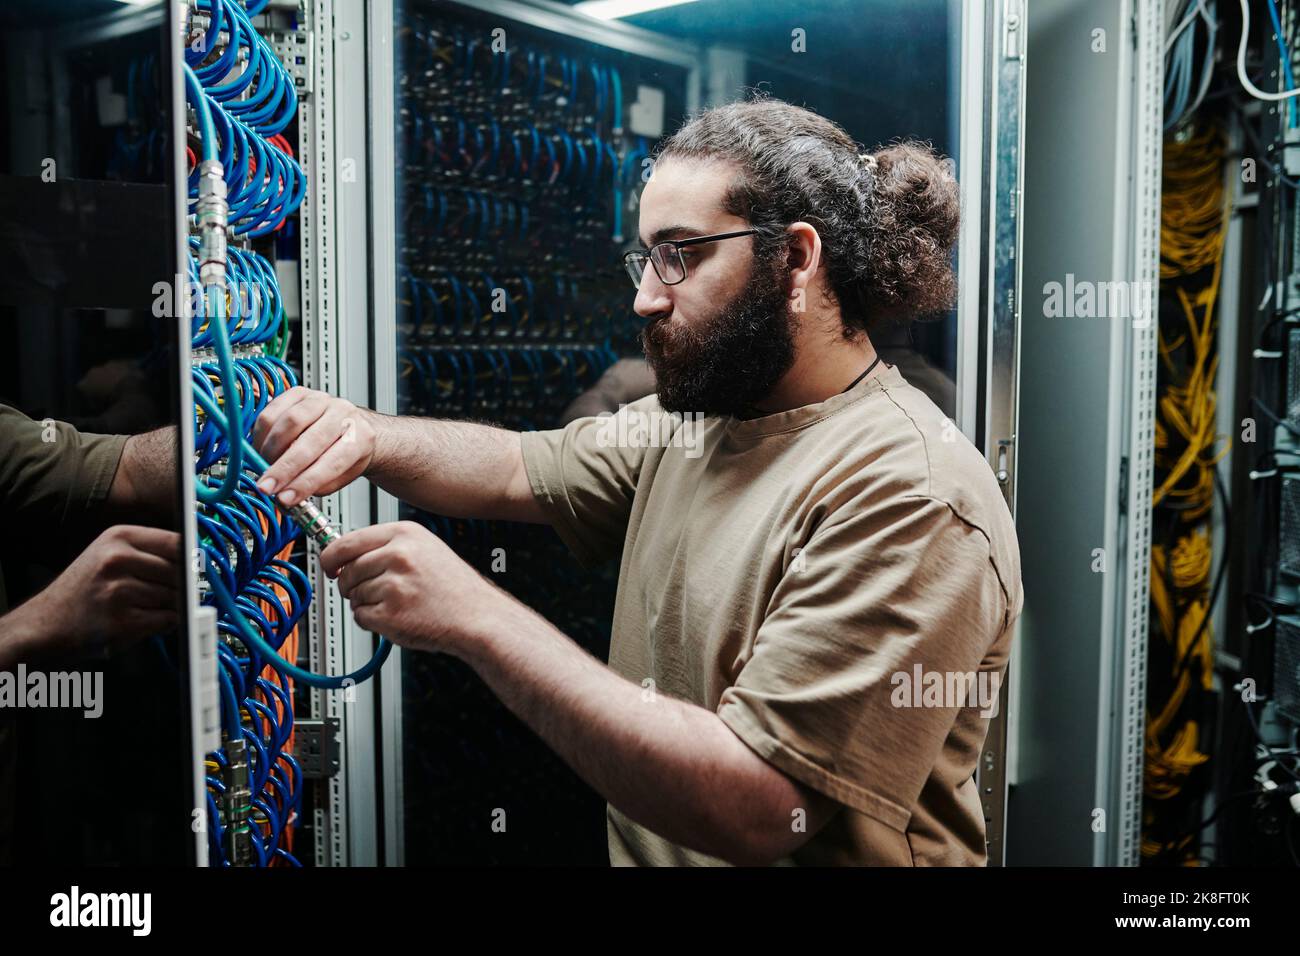 IT expert connecting computer cables in server room Stock Photo